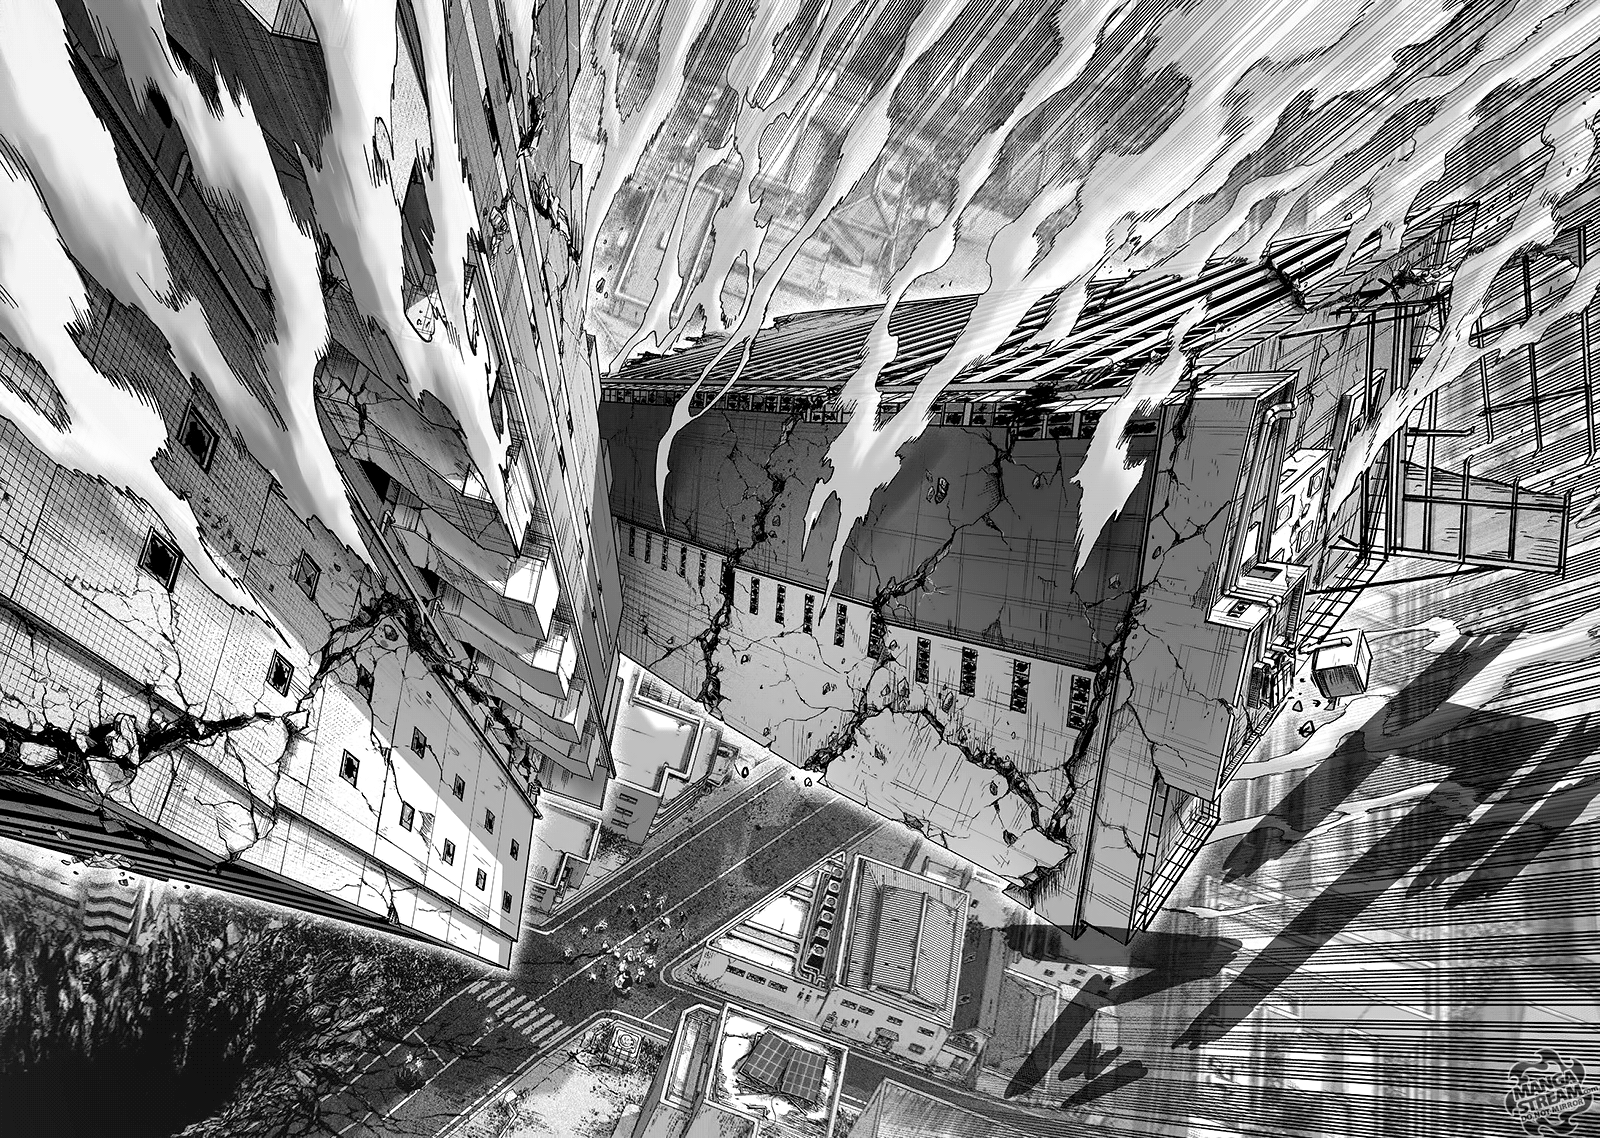 One Punch Man, Chapter 94 - I See image 022